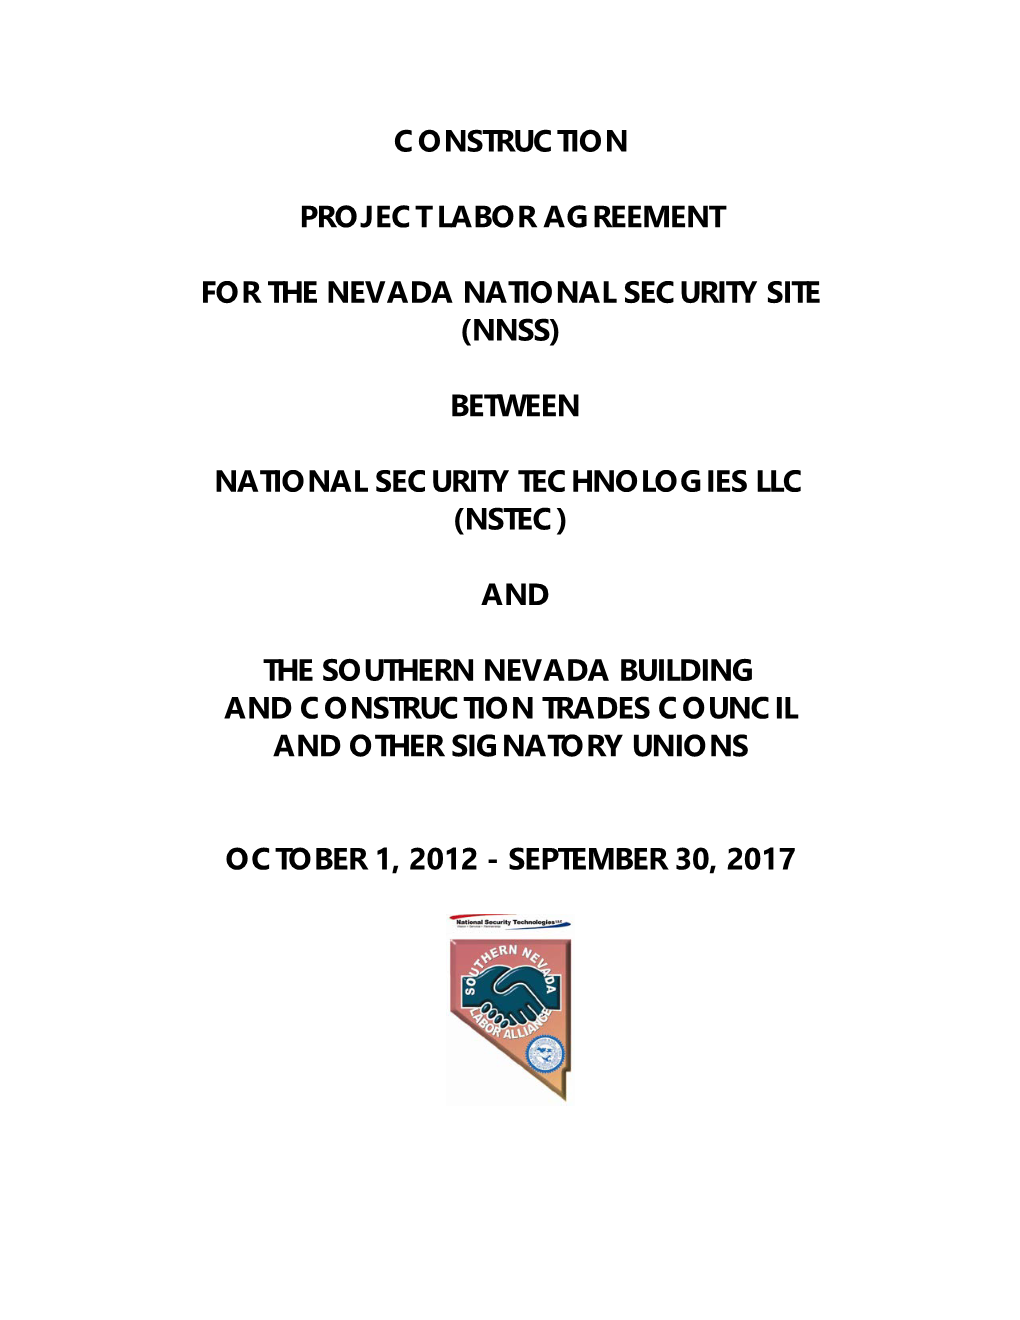 Construction Project Labor Agreement for the Nevada National Security Site (Nnss) Between National Security Technologies Ll